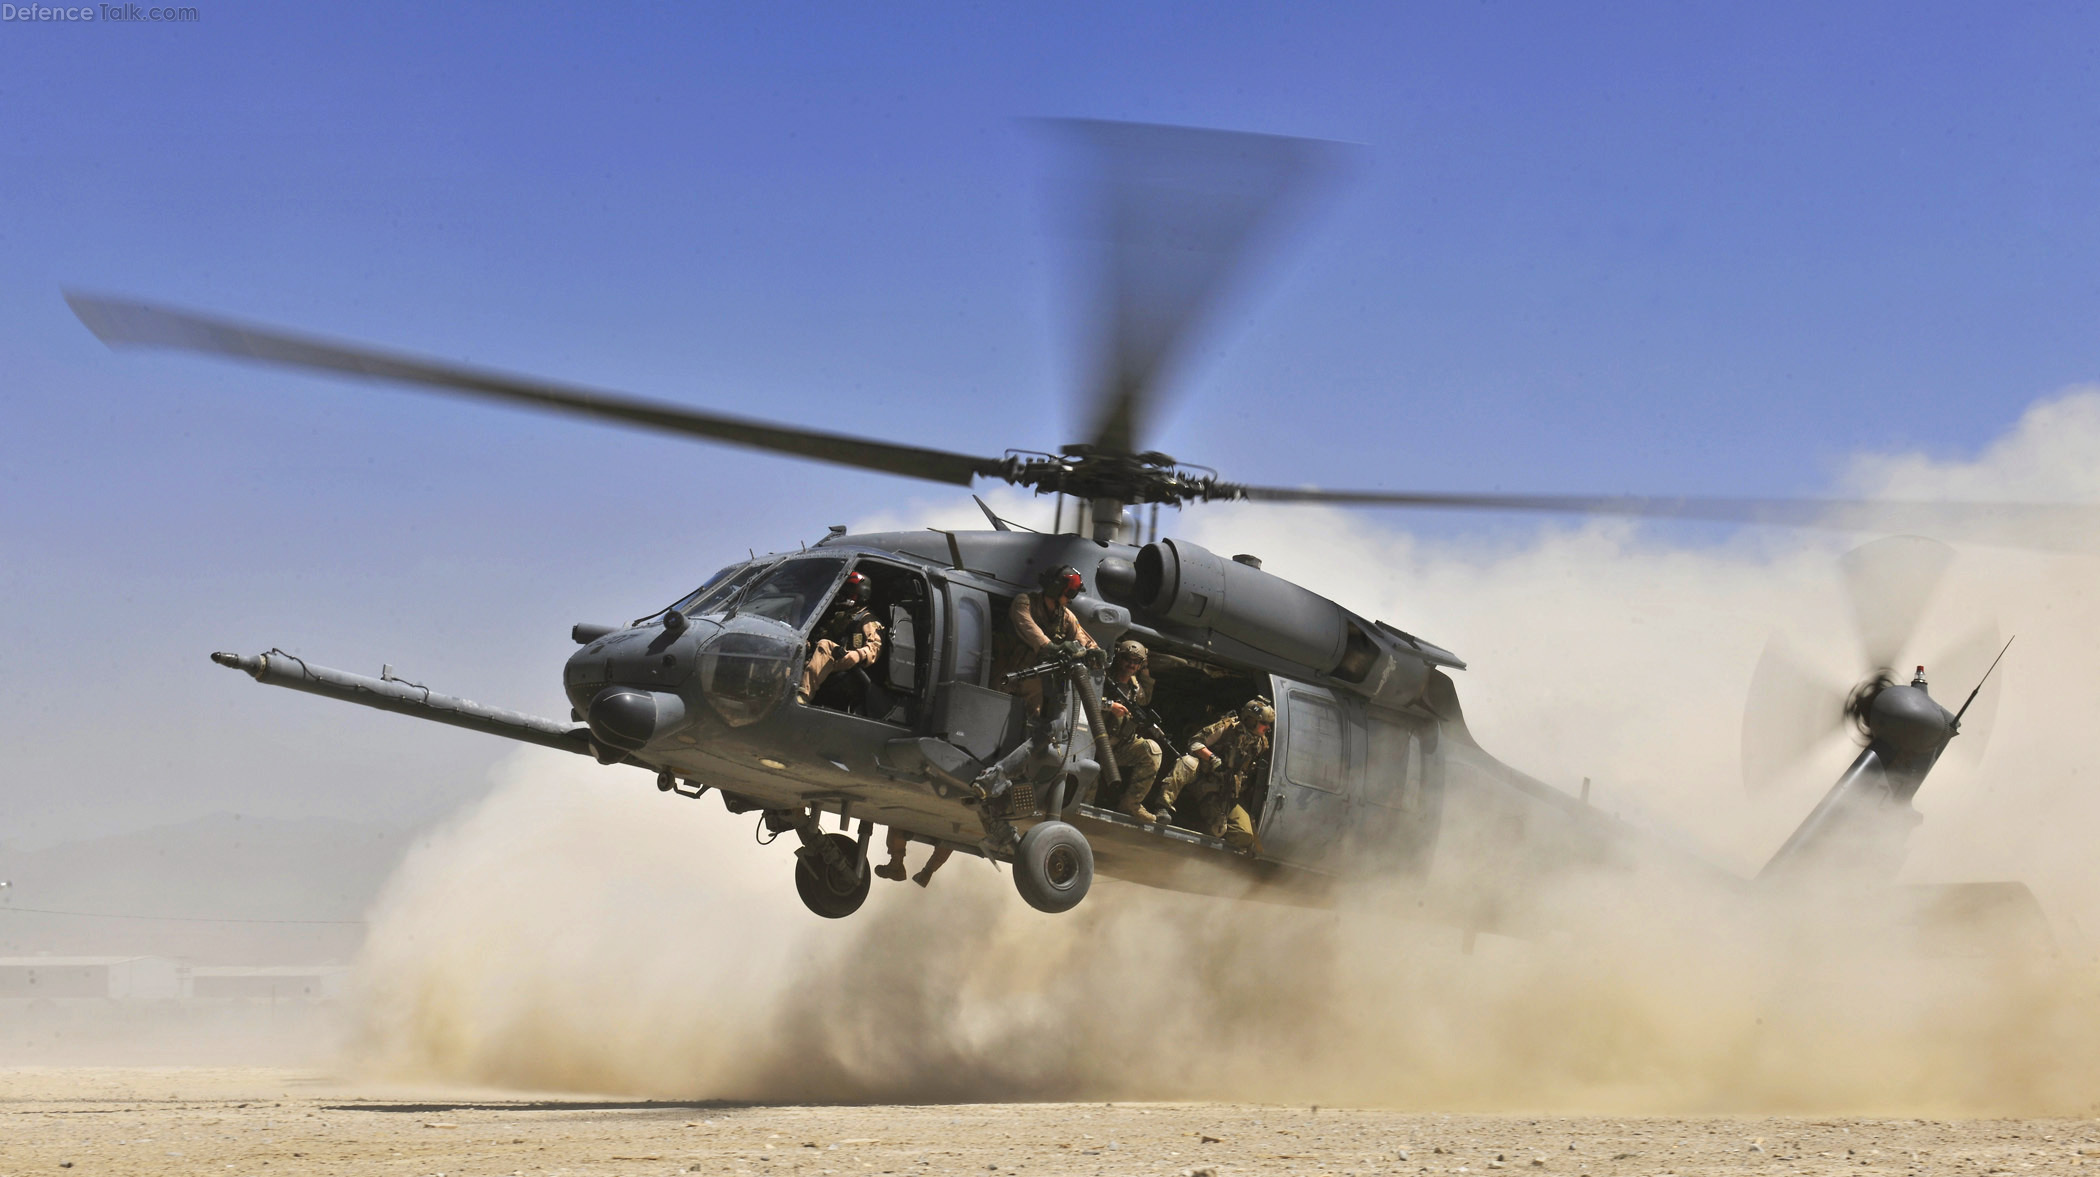 HH-60G Pave Hawk helicopter